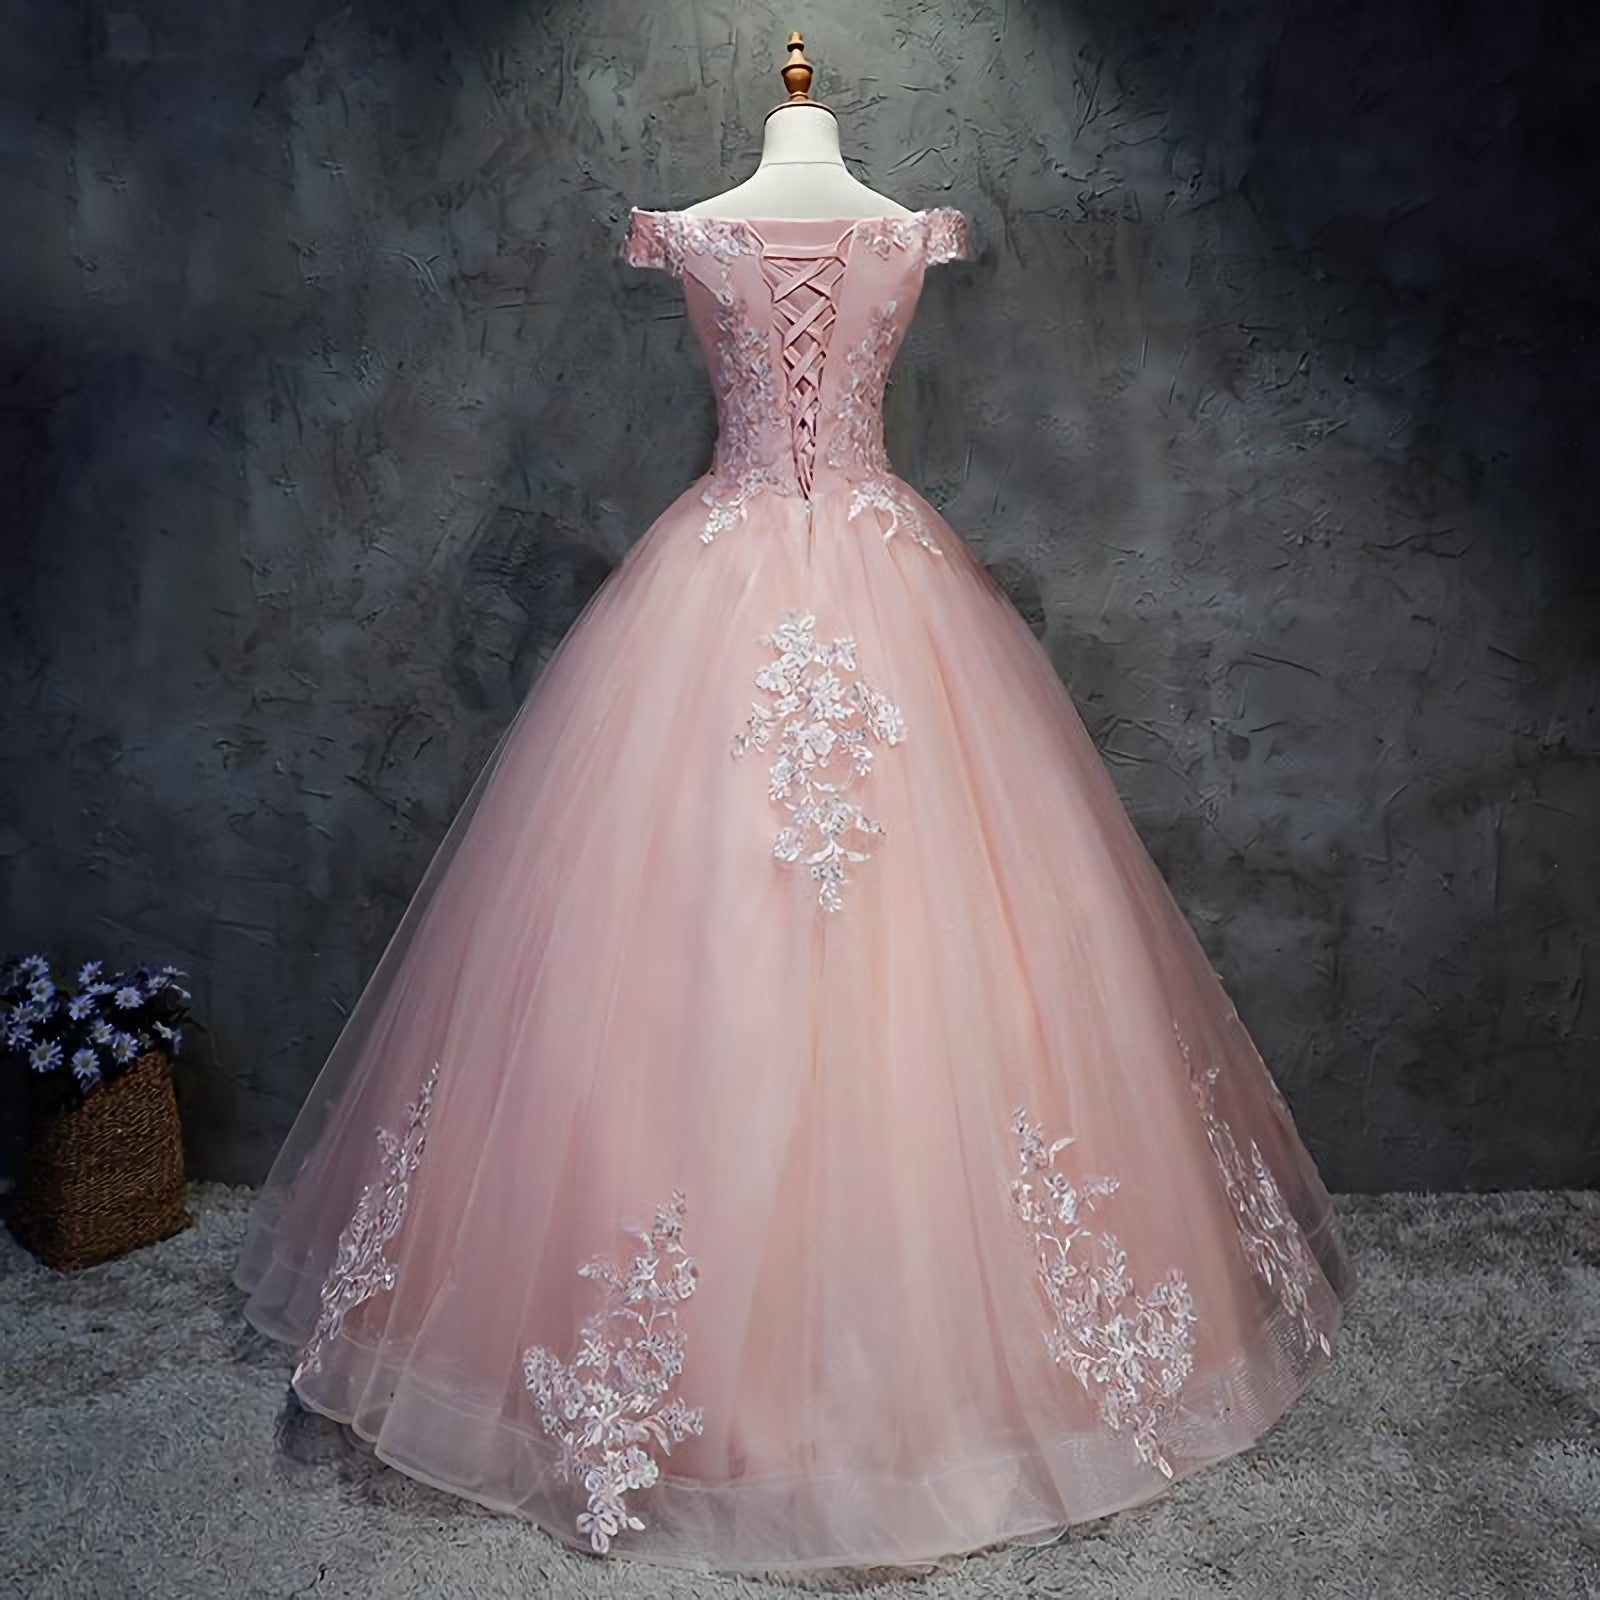 Party Dress Top, Pink Cap Sleeves Ball Gown Tulle With Lace Sweet 16 Prom Dresses, Long Quinceanera Dresses